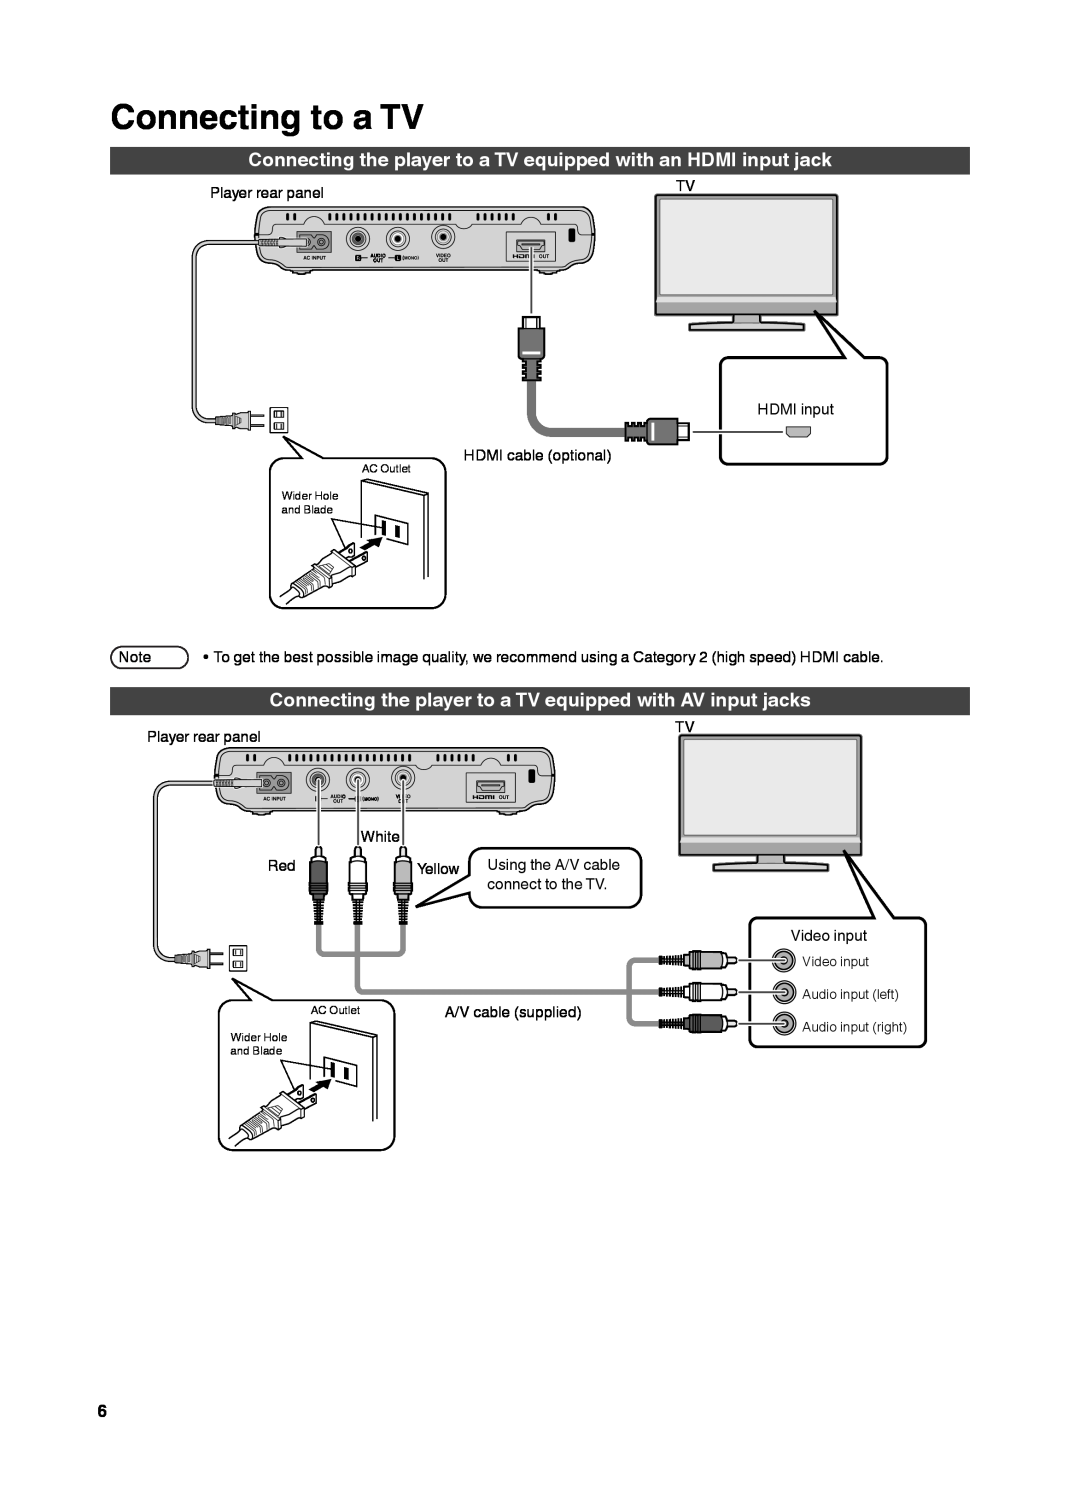 JVC CU-VS100U instruction manual Connecting to a TV, Connecting the player to a TV equipped with an HDMI input jack 